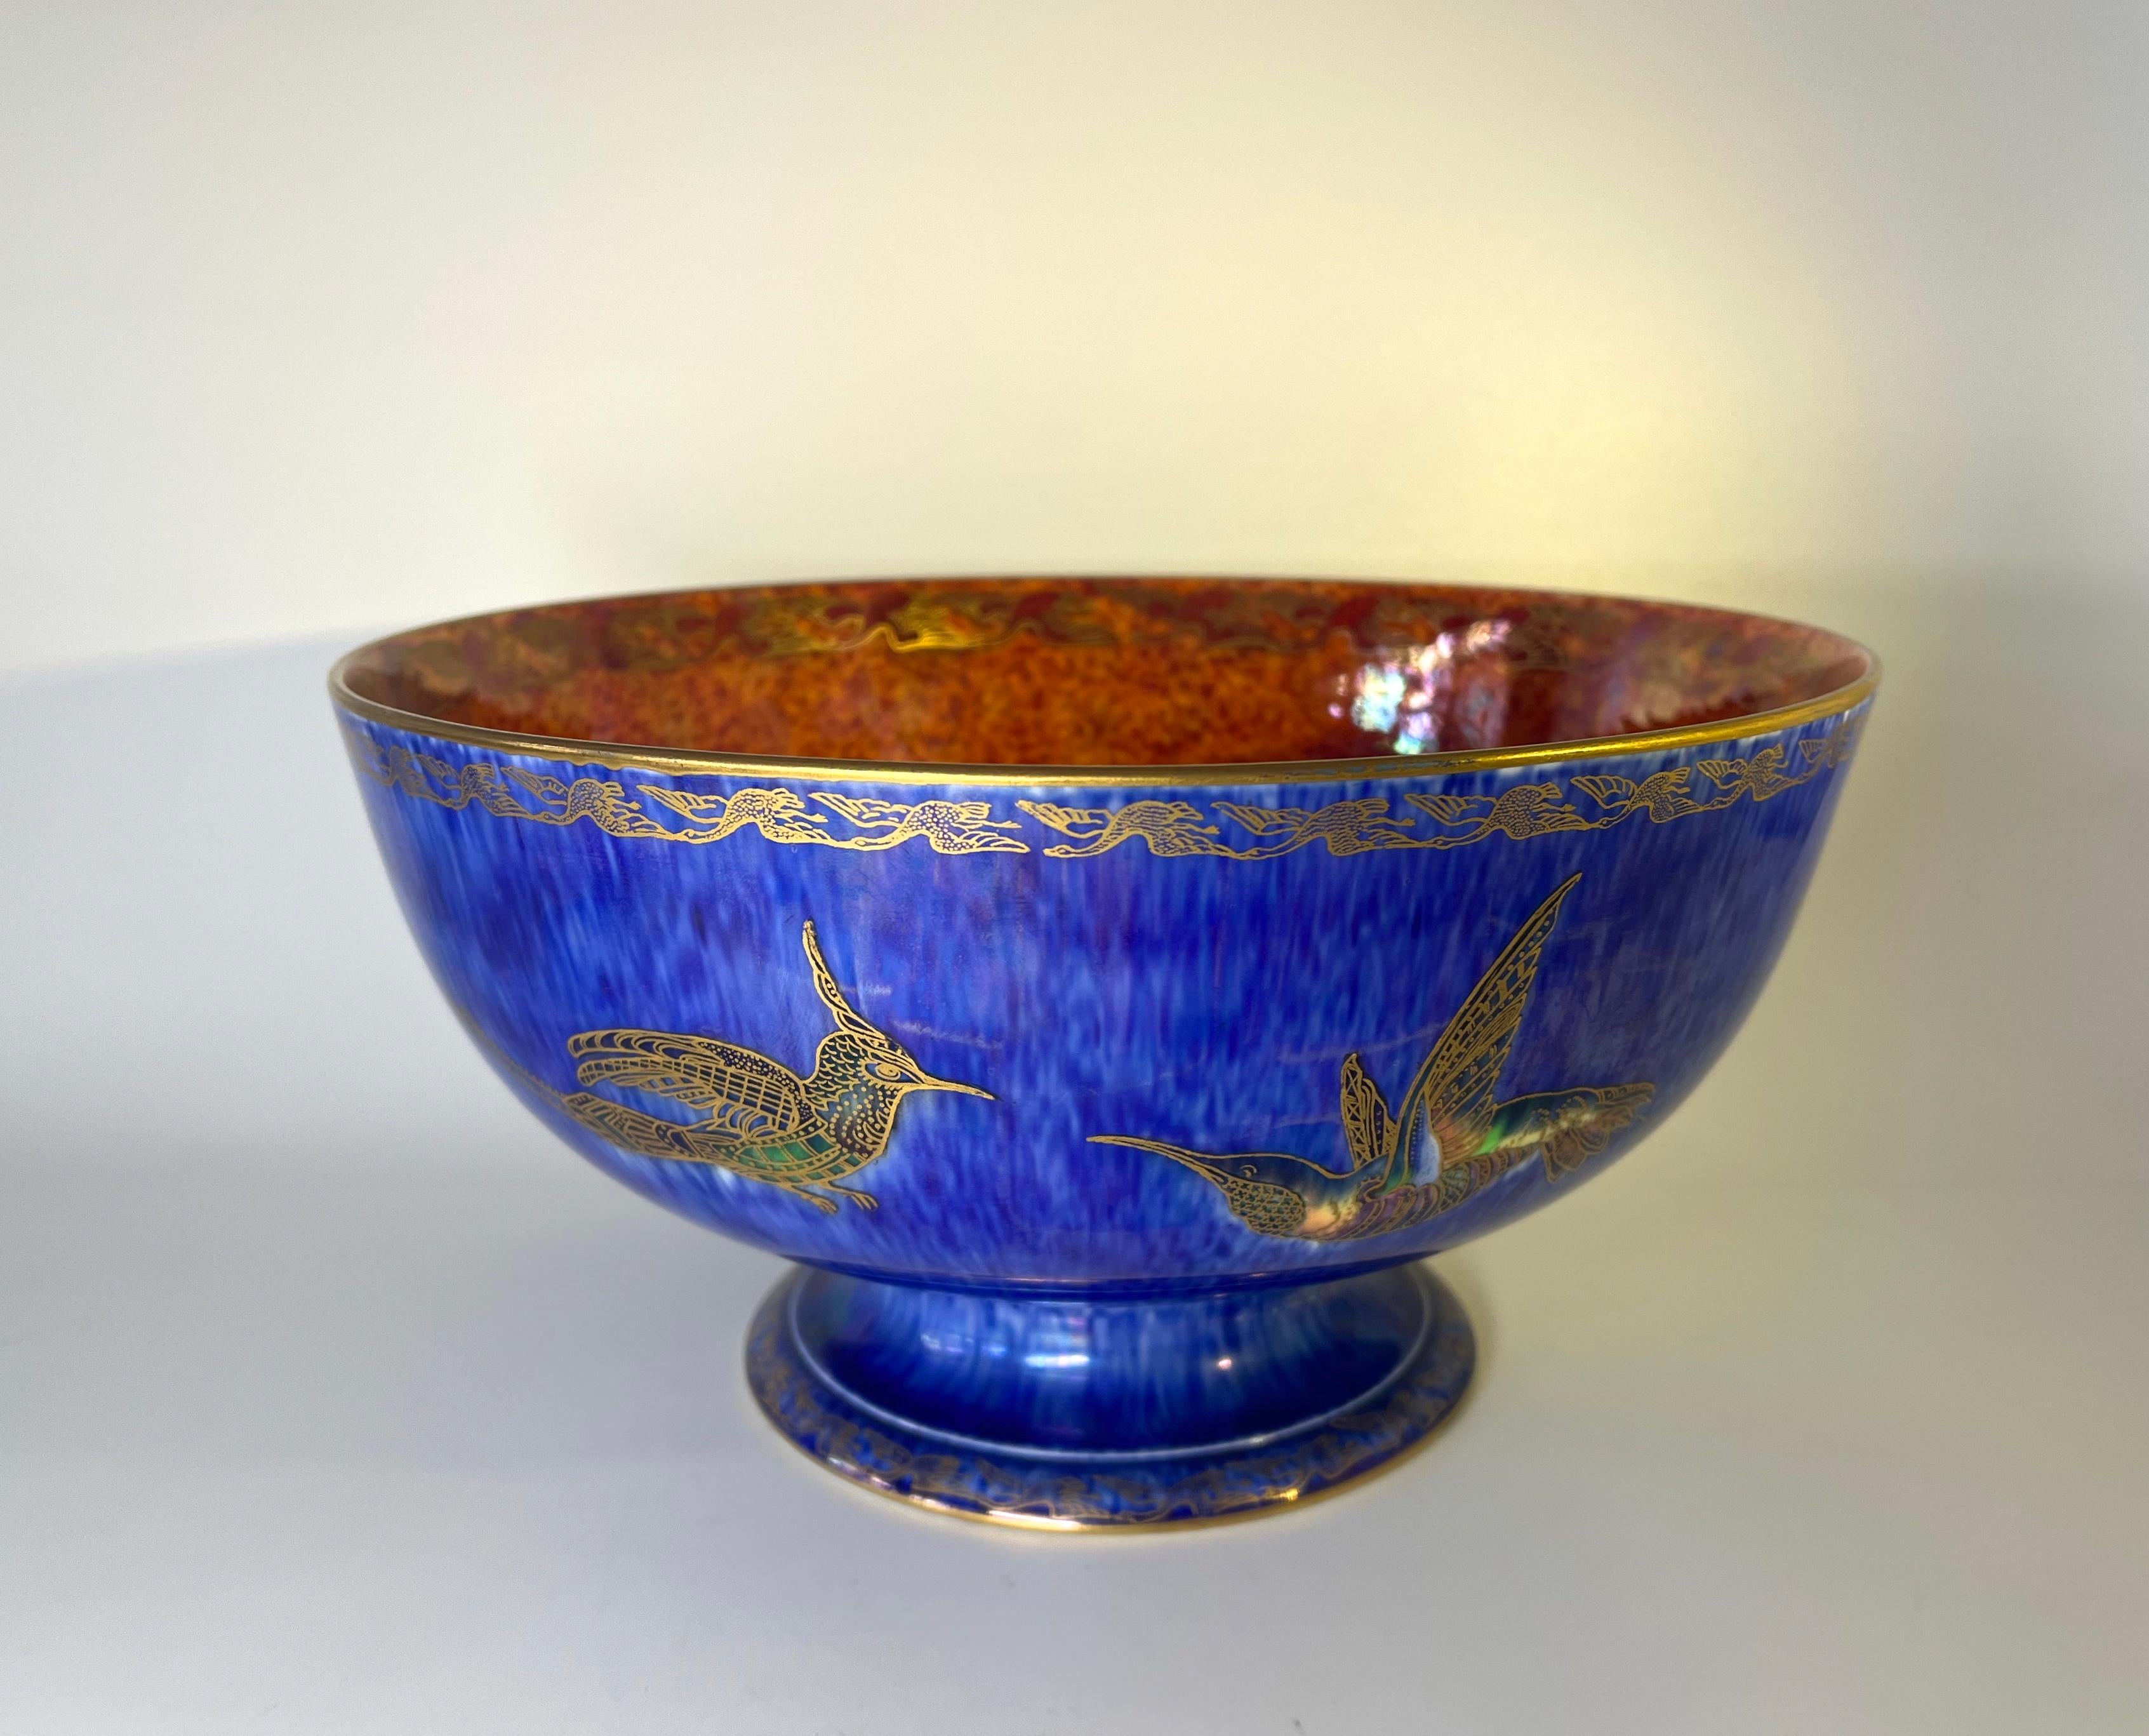 Imposing and monumental Wedgwood footed bowl by Daisy Makes-Jones of the Ordinary Lustre Series 
Superbly vibrant blue mottled ground decorated with hand painted and gilded exotic birds
The inner bowl graduates from deep orange to pomegranate red